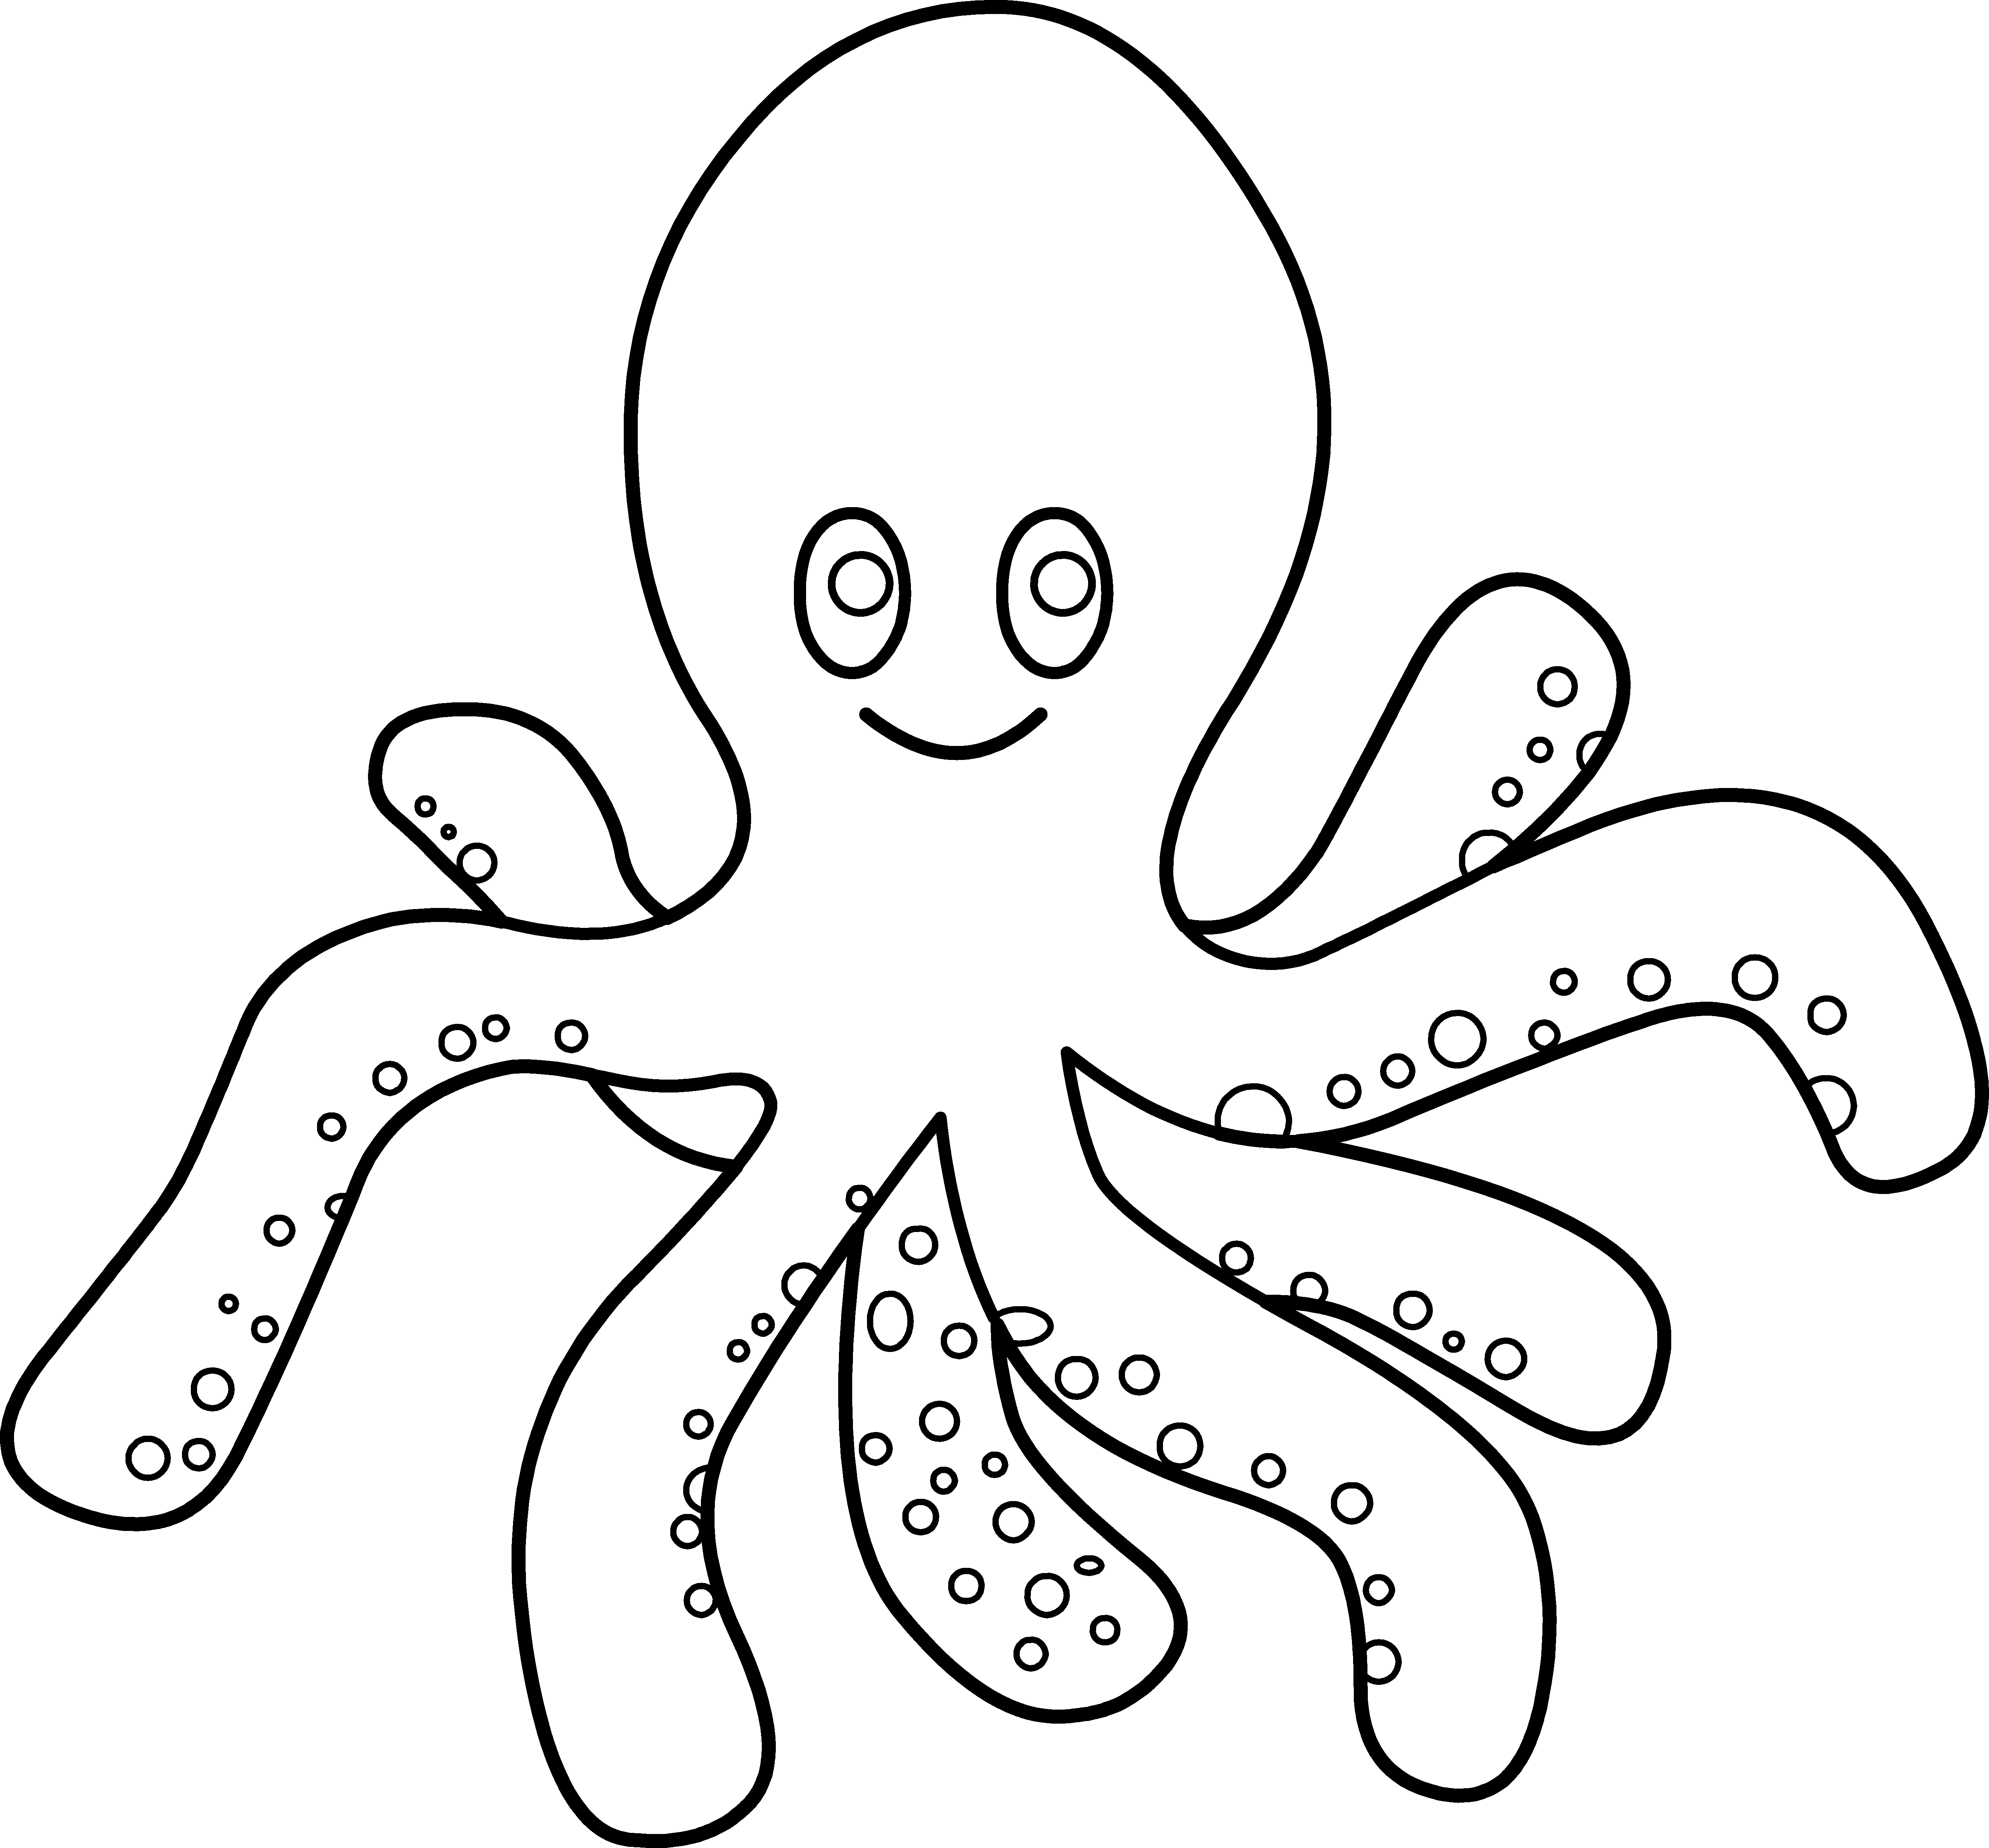 Free Octopus Outline Cliparts, Download Free Octopus Outline Cliparts